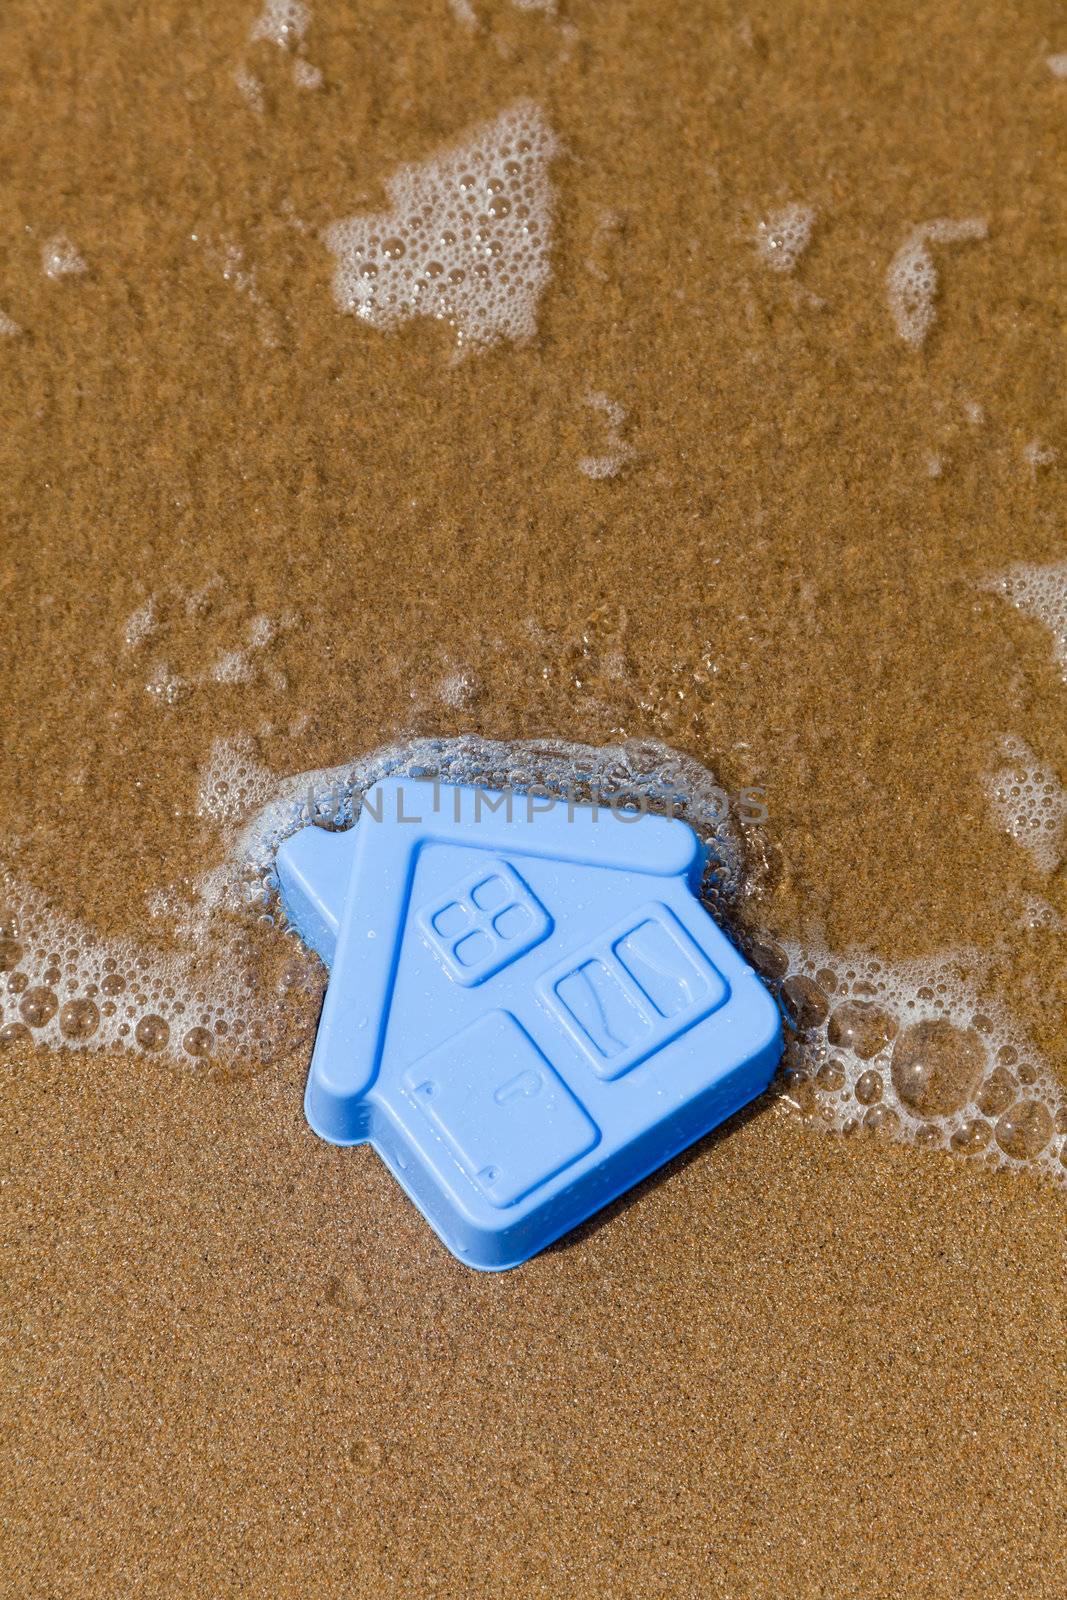 Plastic toy house lies on the sand by Antartis